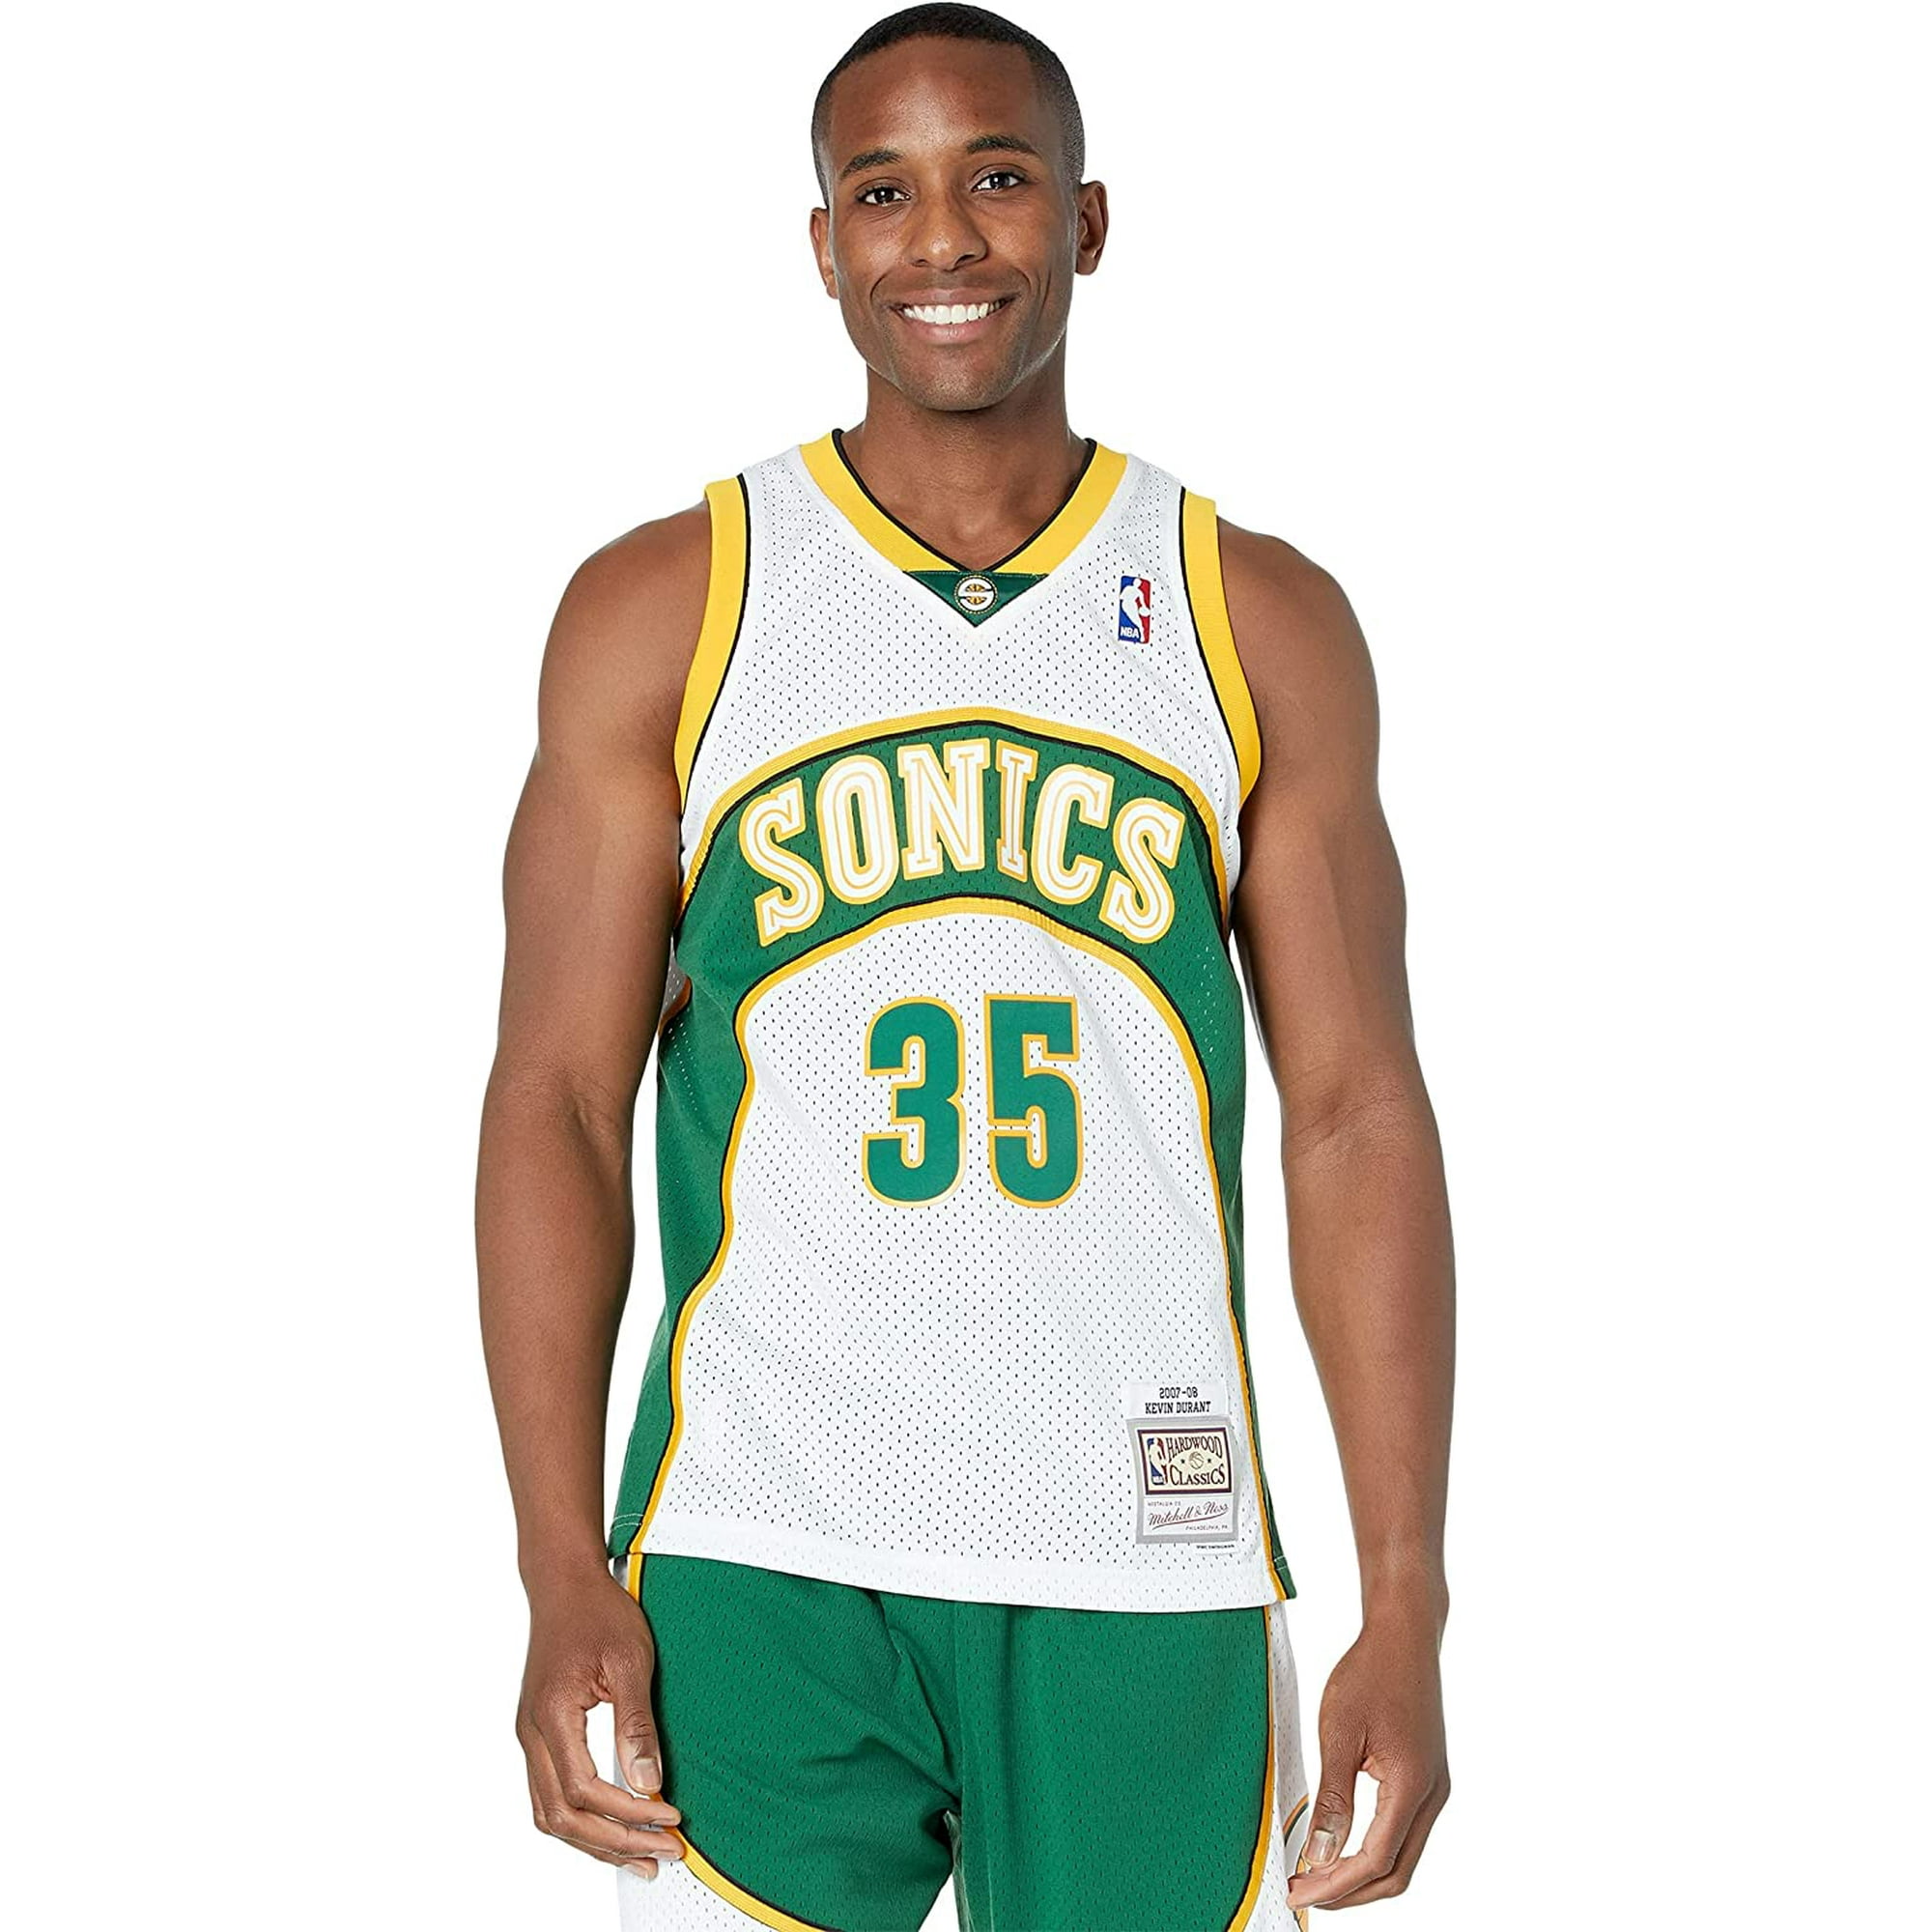 Kevin Durant 35 Seattle Supersonics 2007-08 Mitchell & Ness